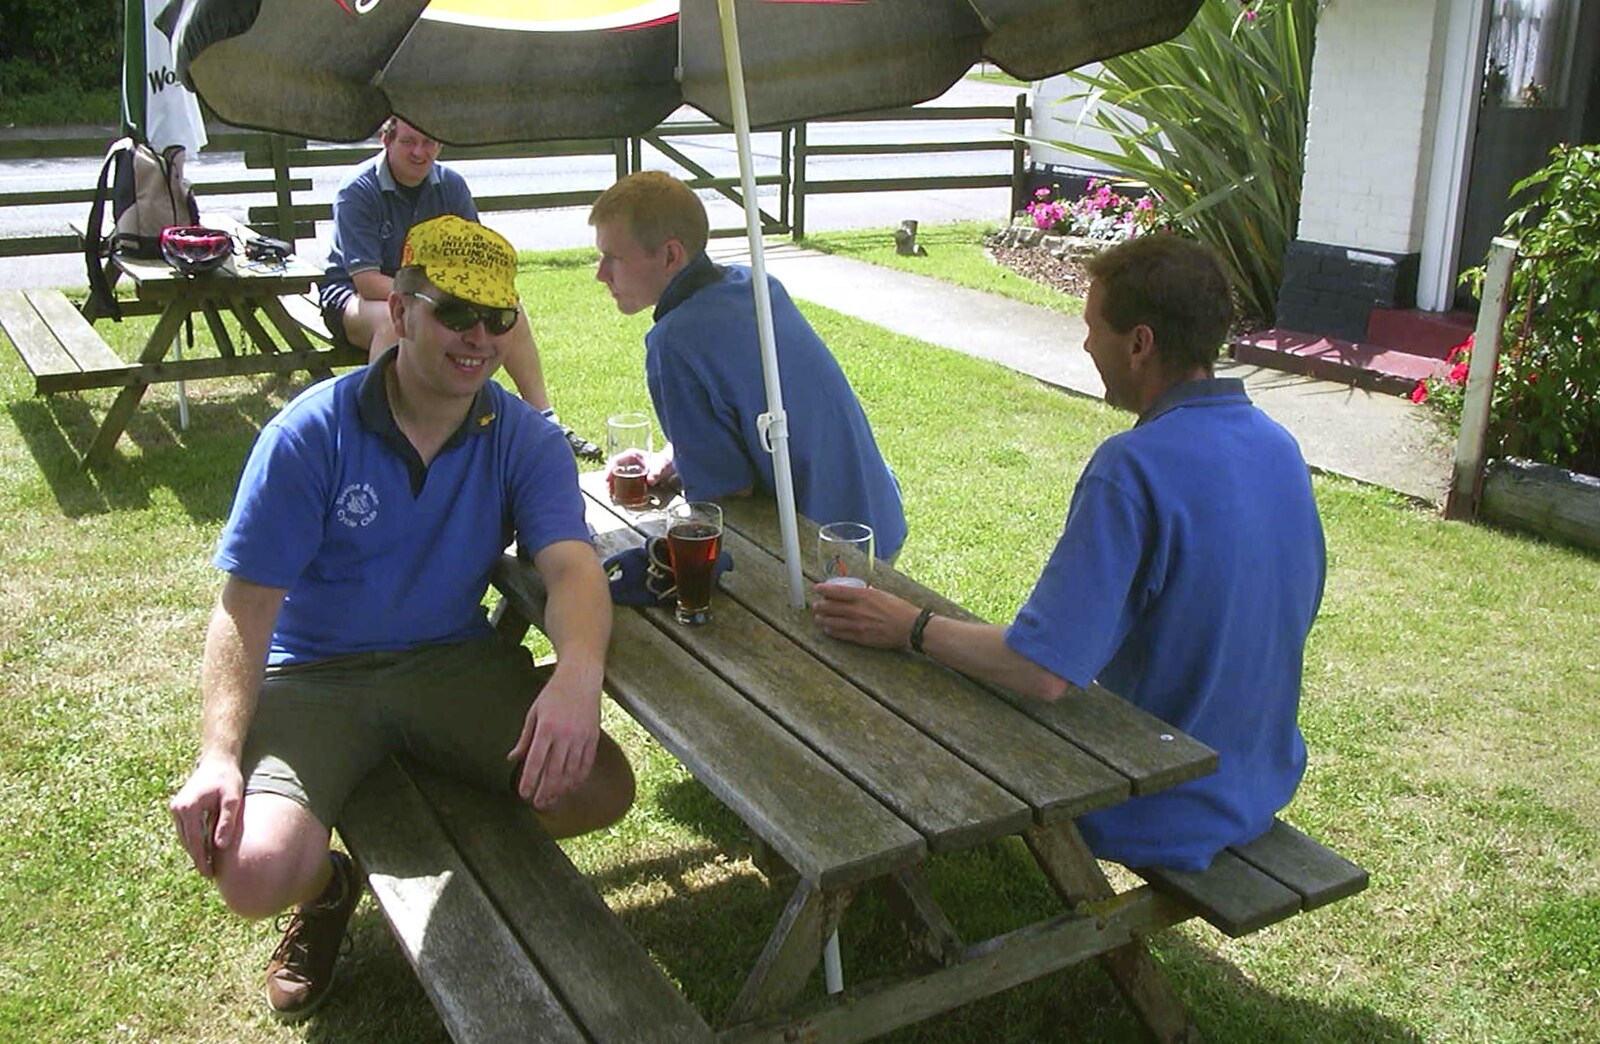 The BSCC Annual Bike Ride, Orford, Suffolk - 12th July 2003: Marc, Bill and Apple under a parasol